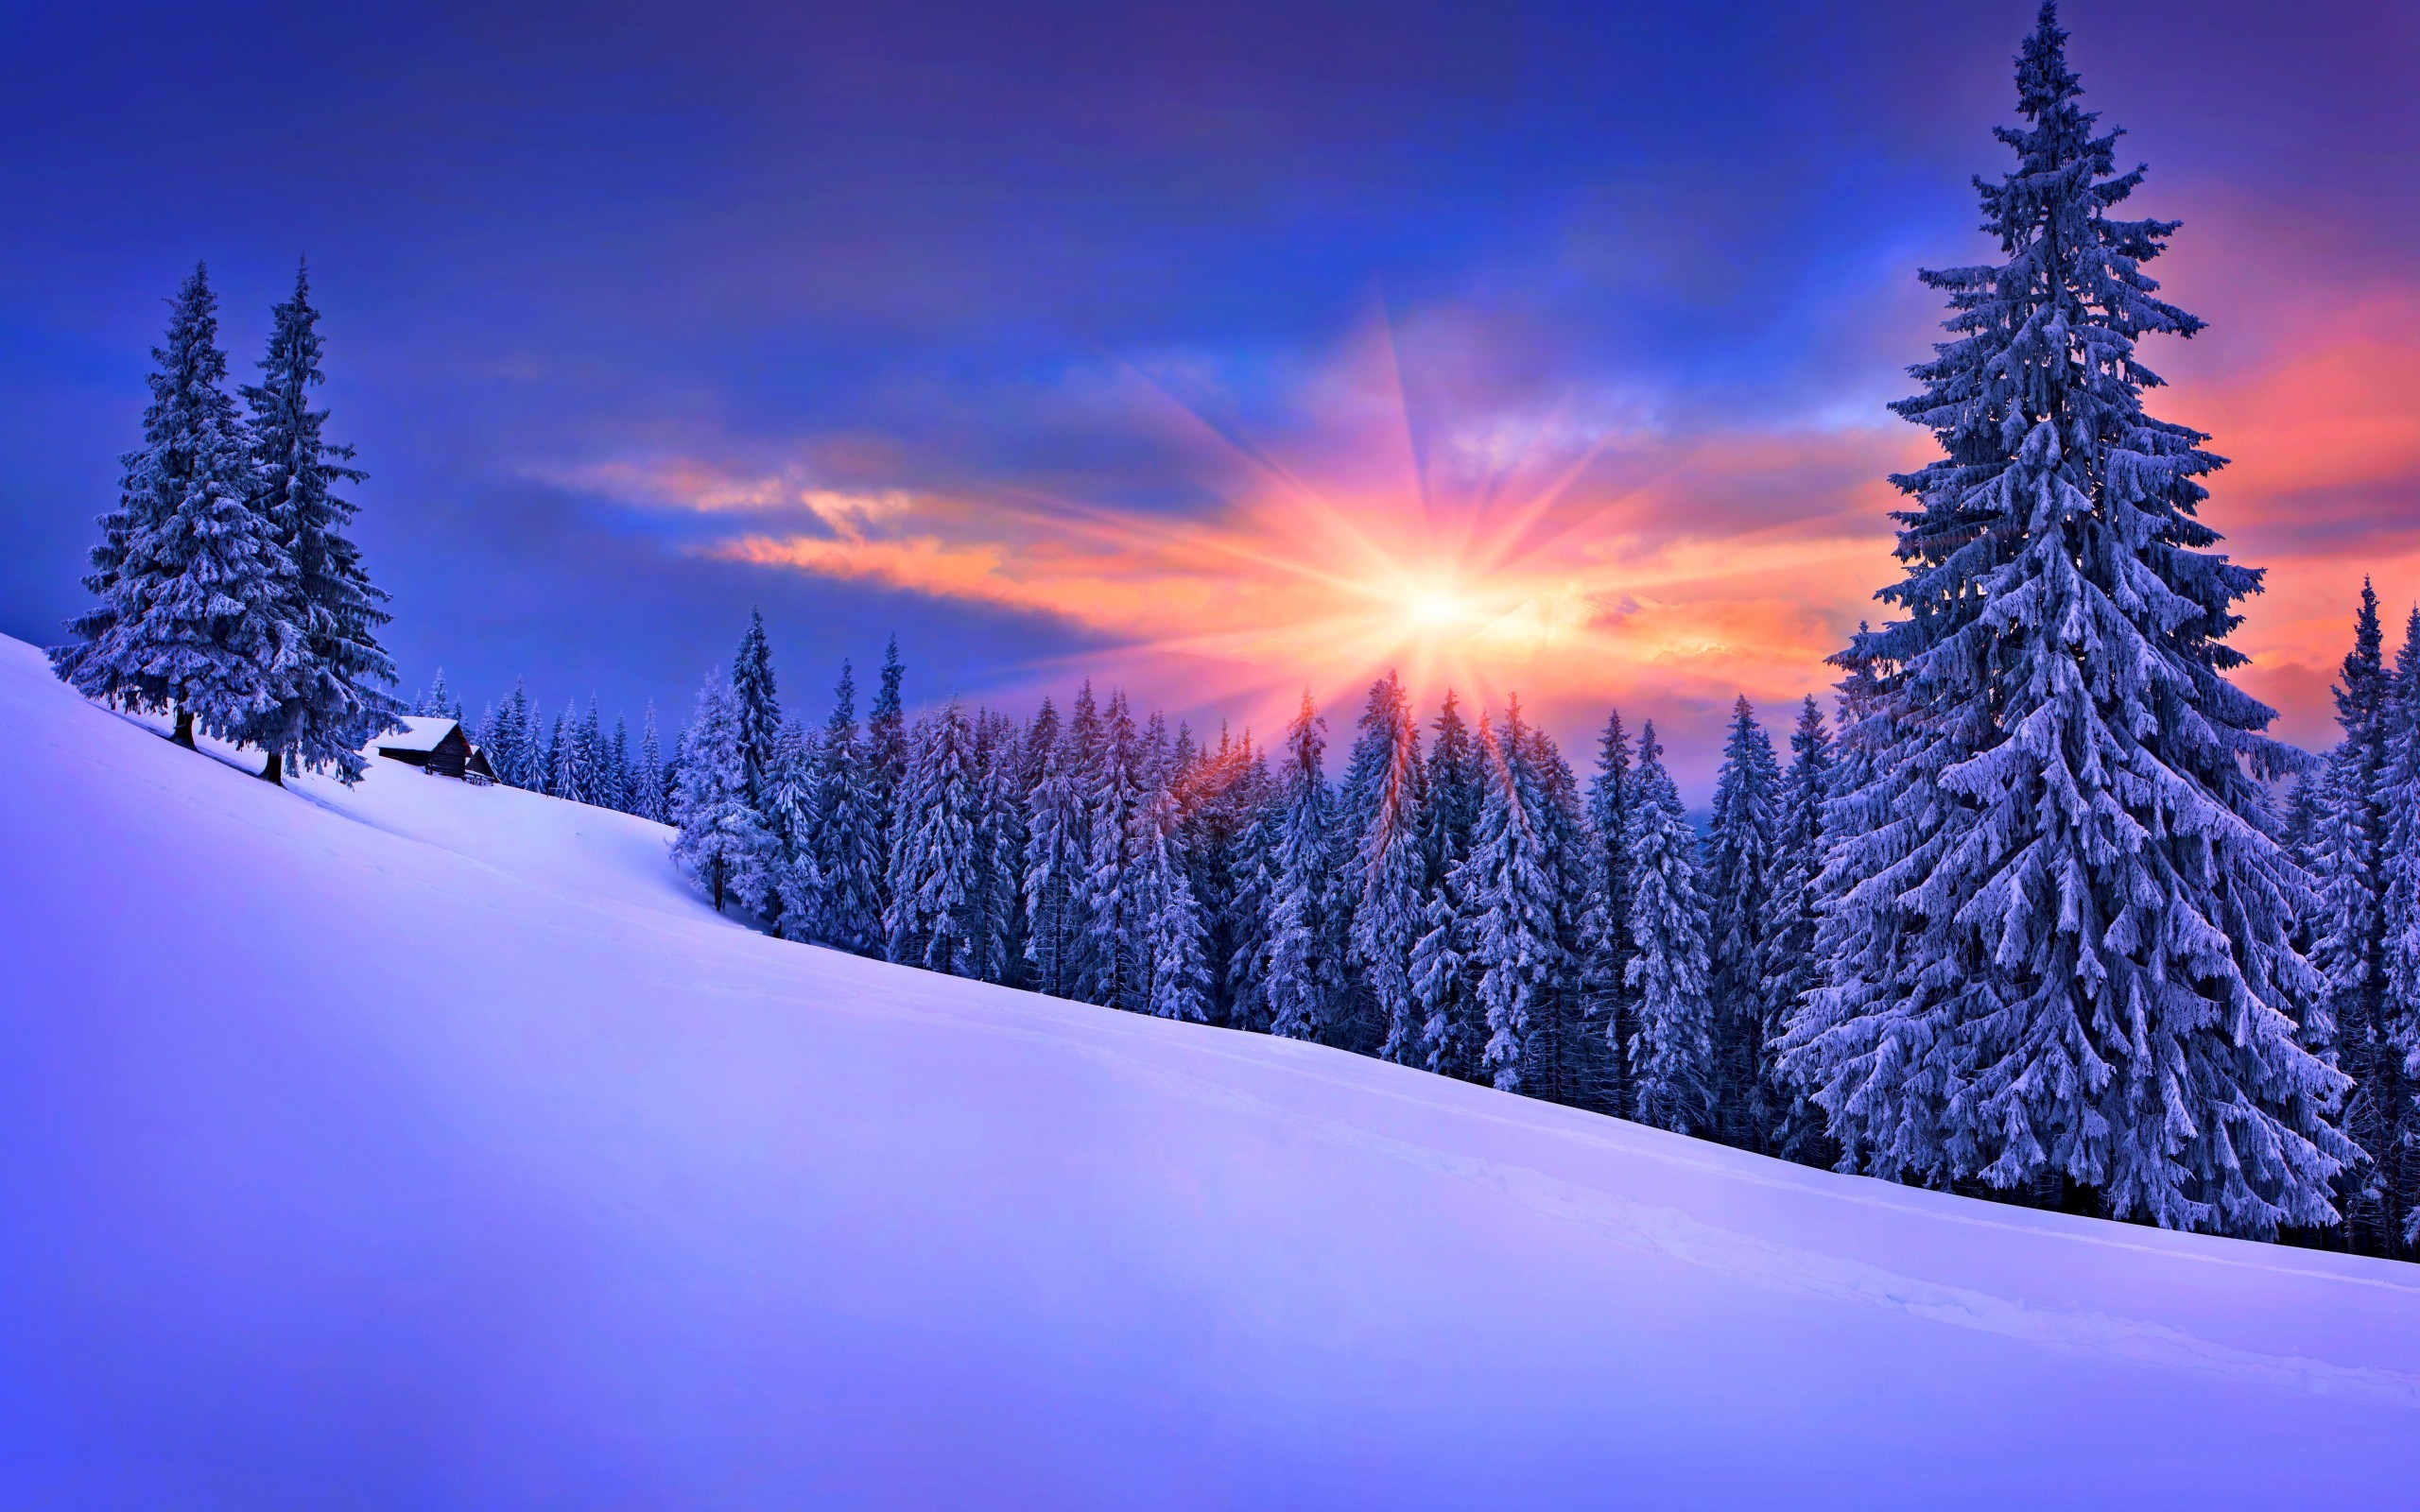 General 2560x1600 forest winter snow landscape pine trees nature trees sky sunlight cold outdoors low light